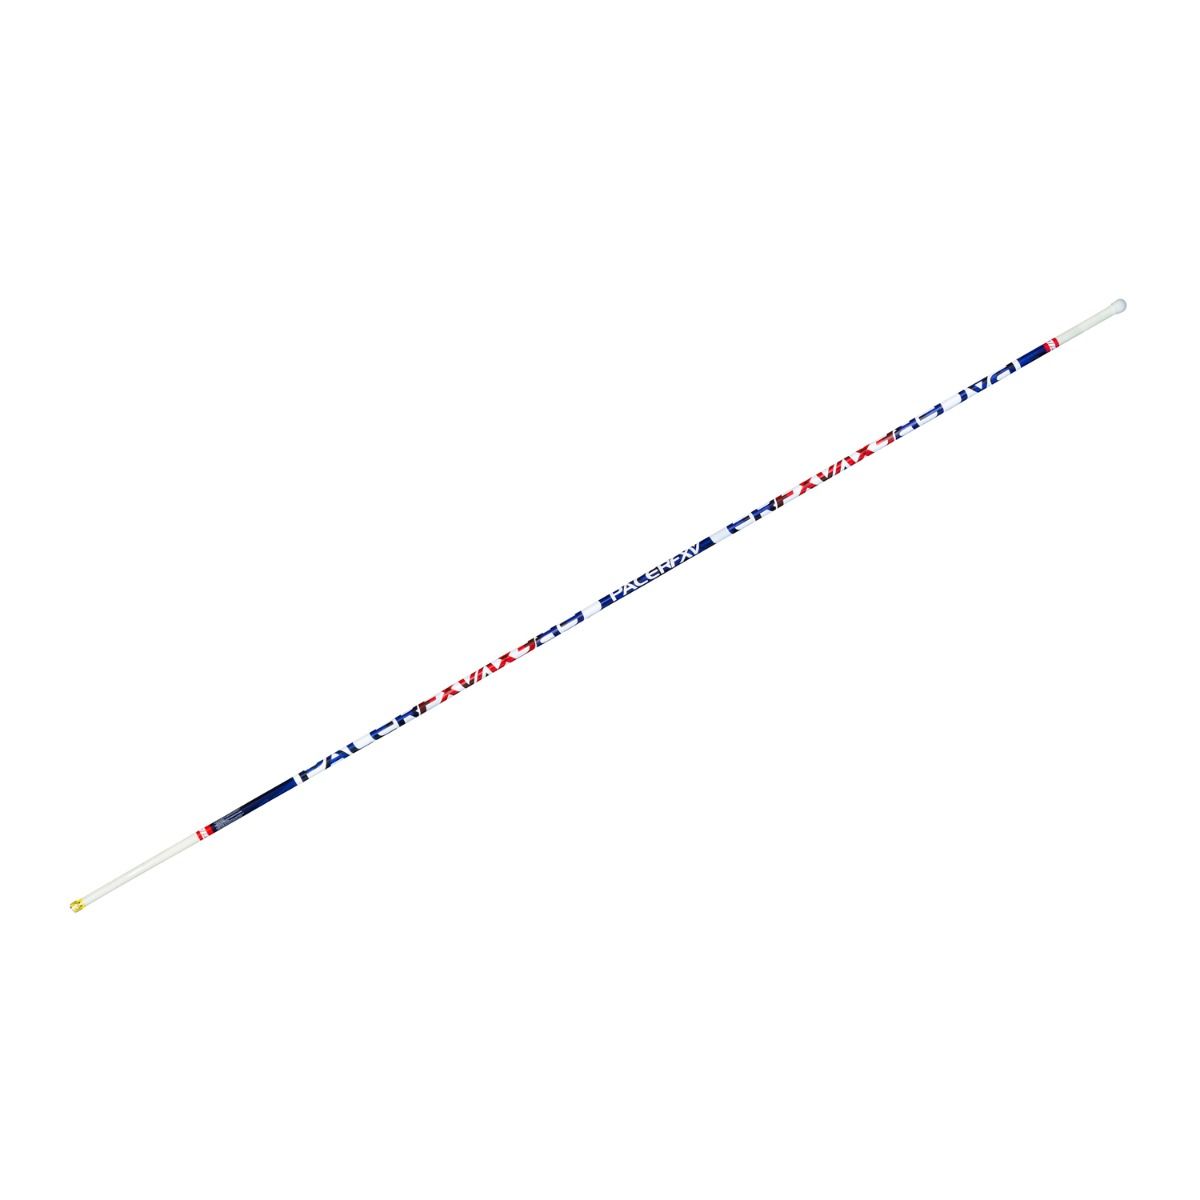 Gill PacerFXV 13' 6" Vaulting Pole